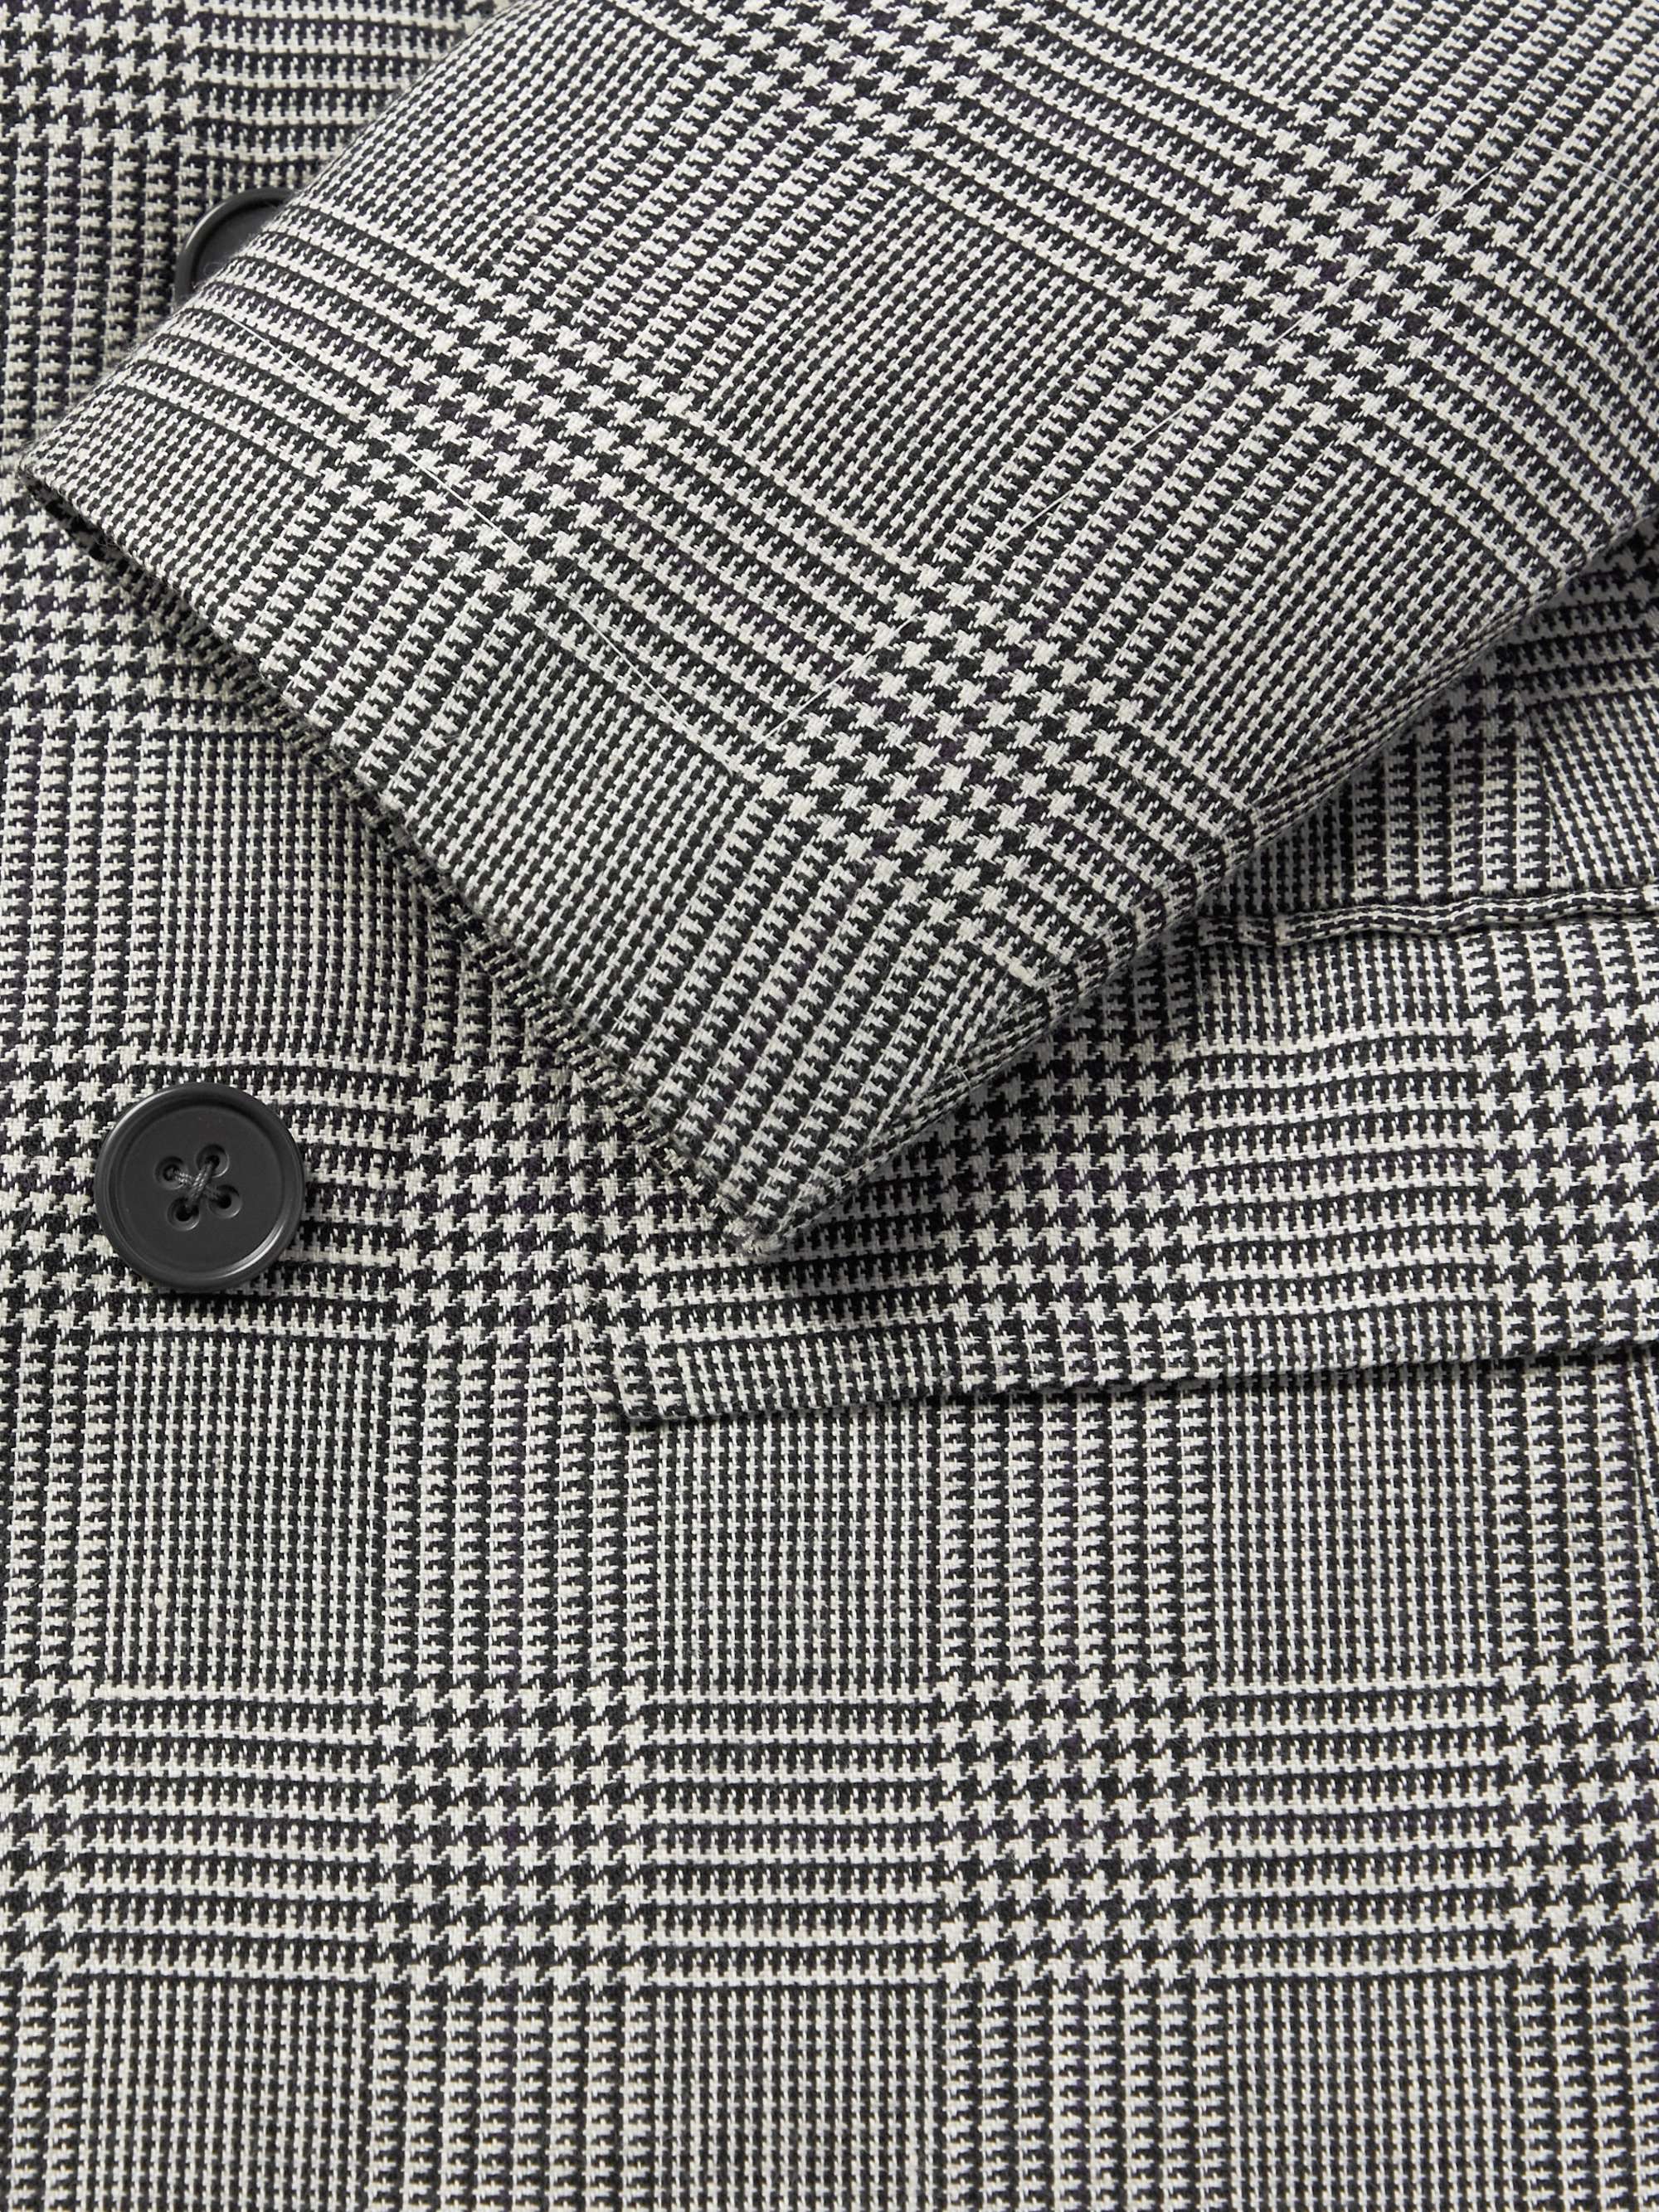 RALPH LAUREN PURPLE LABEL Kent Double-Breasted Prince of Wales Checked Wool Suit Jacket